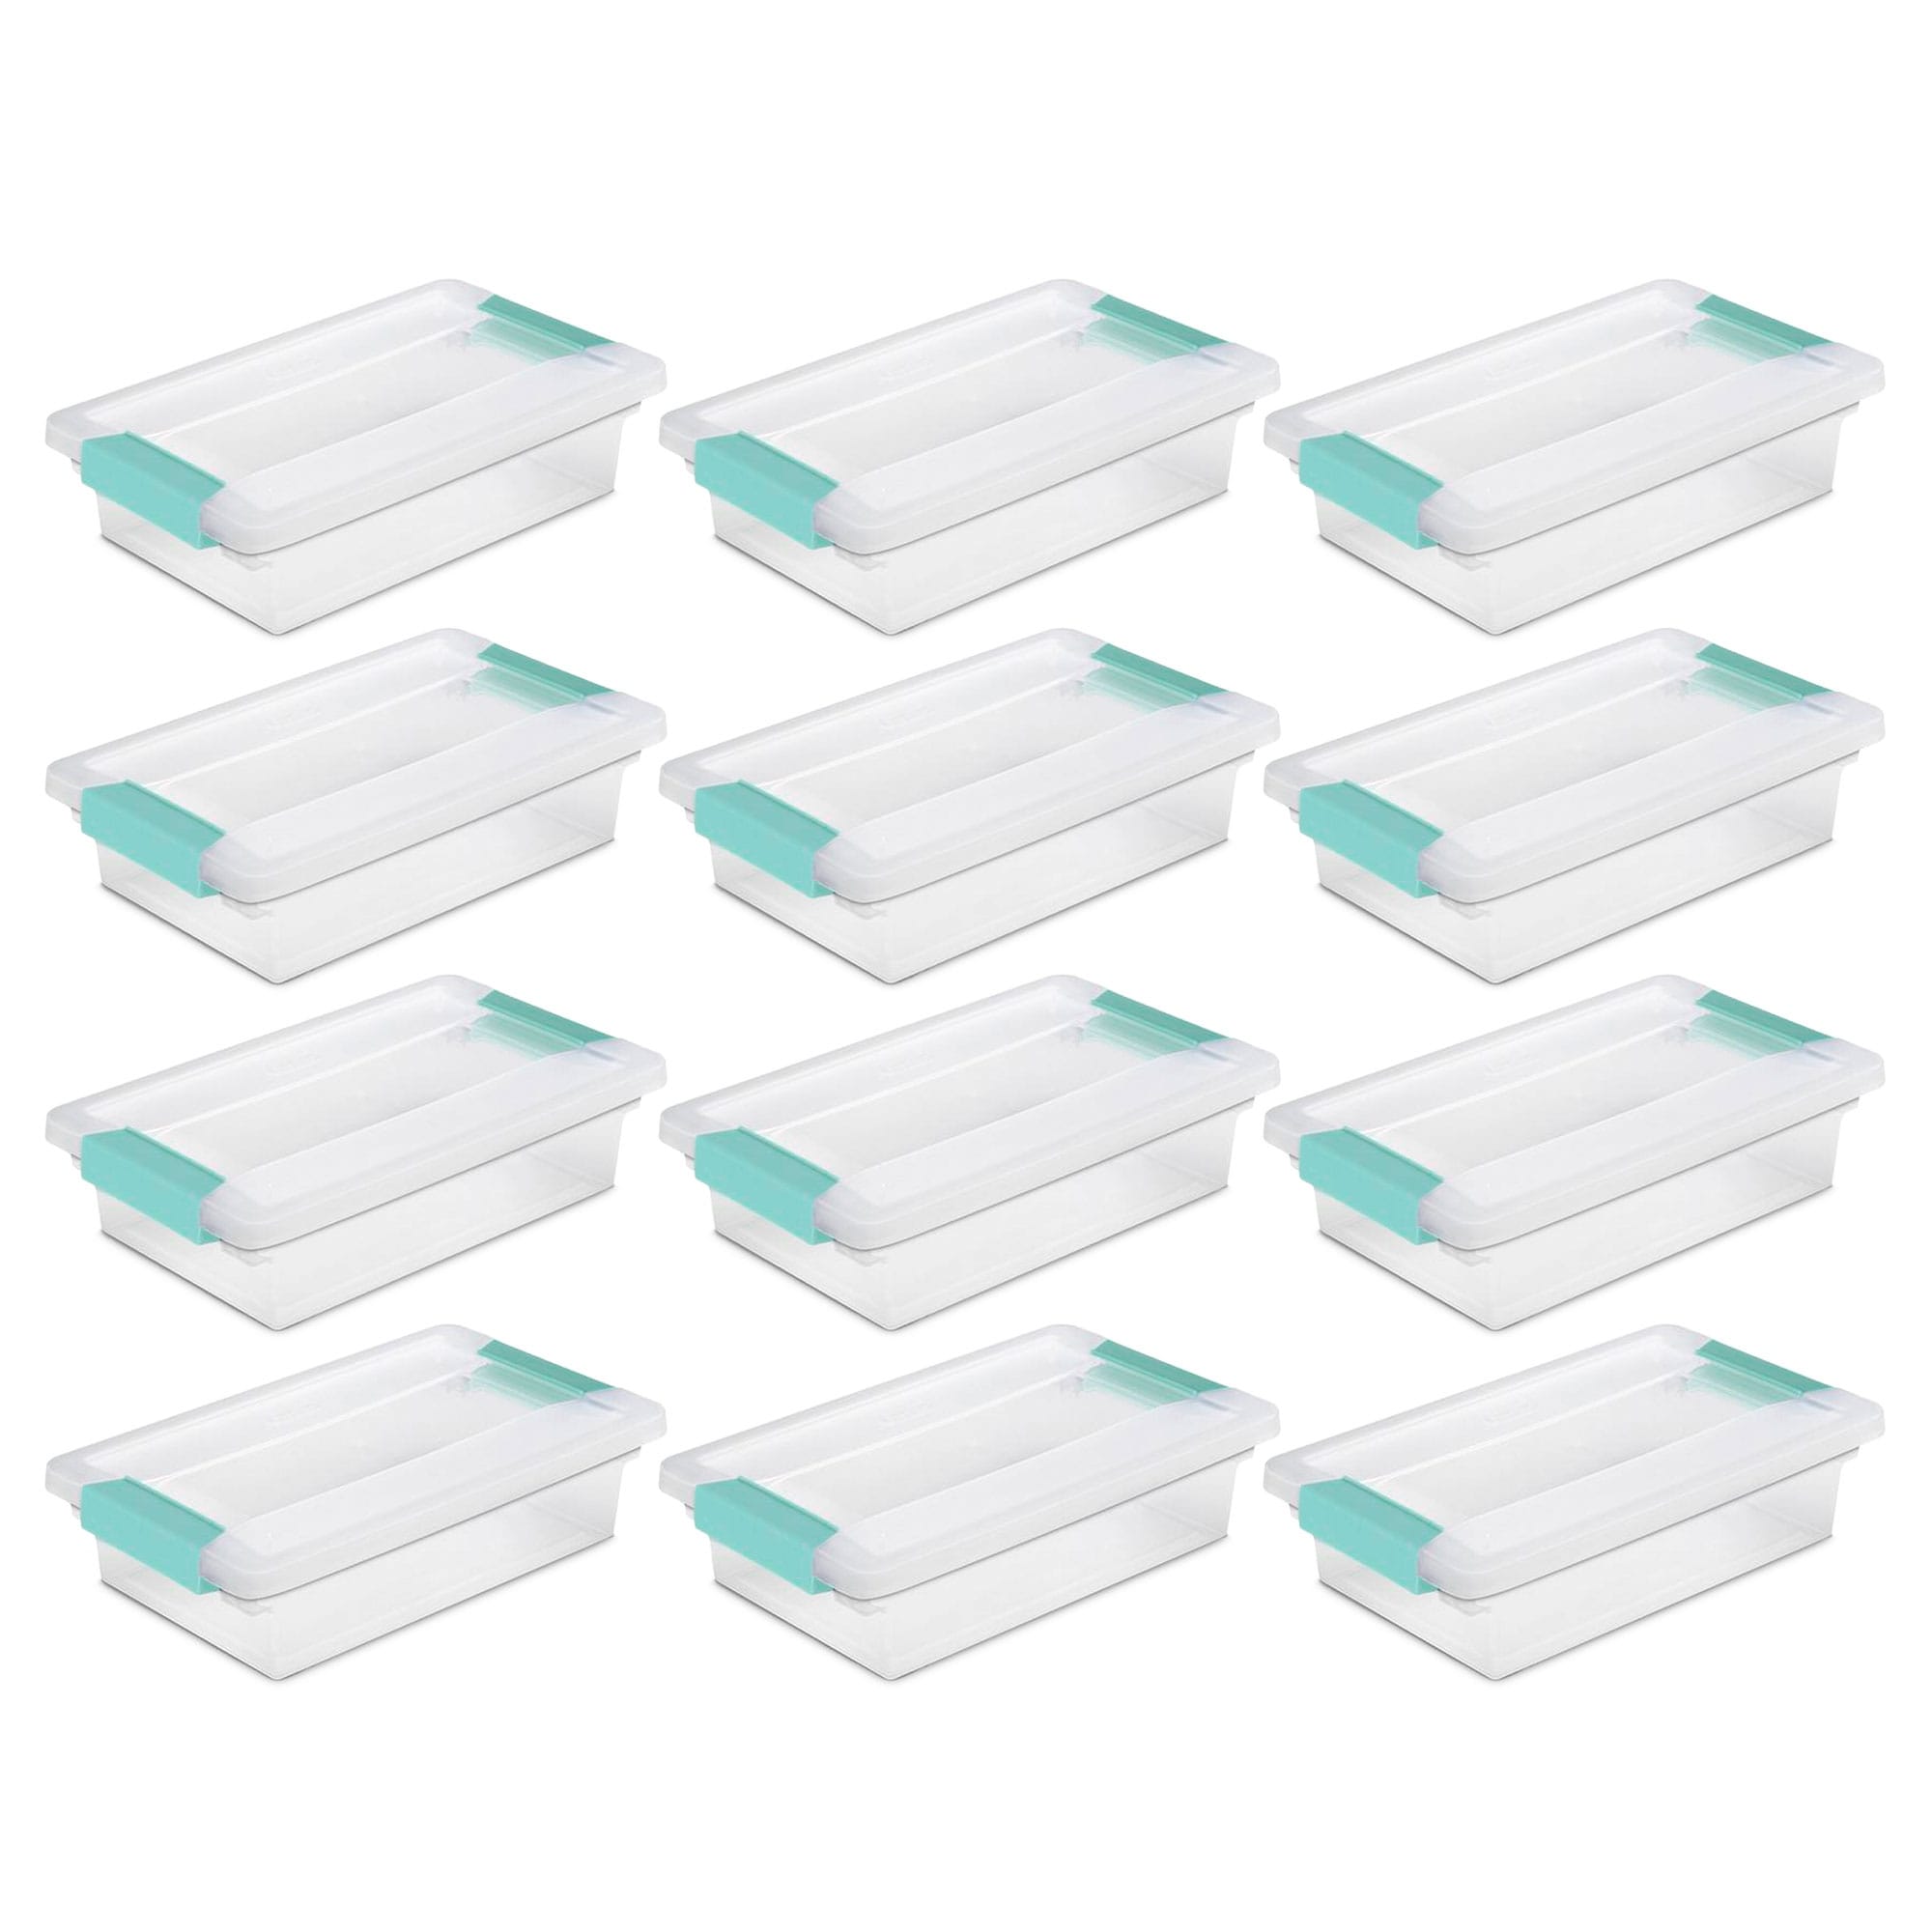 Sterilite Small Clip Box, Stackable Storage Bin with Latching Lid, Plastic  Container to Organize Office, Crafts, Home, Clear Base and Lid, 18-Pack